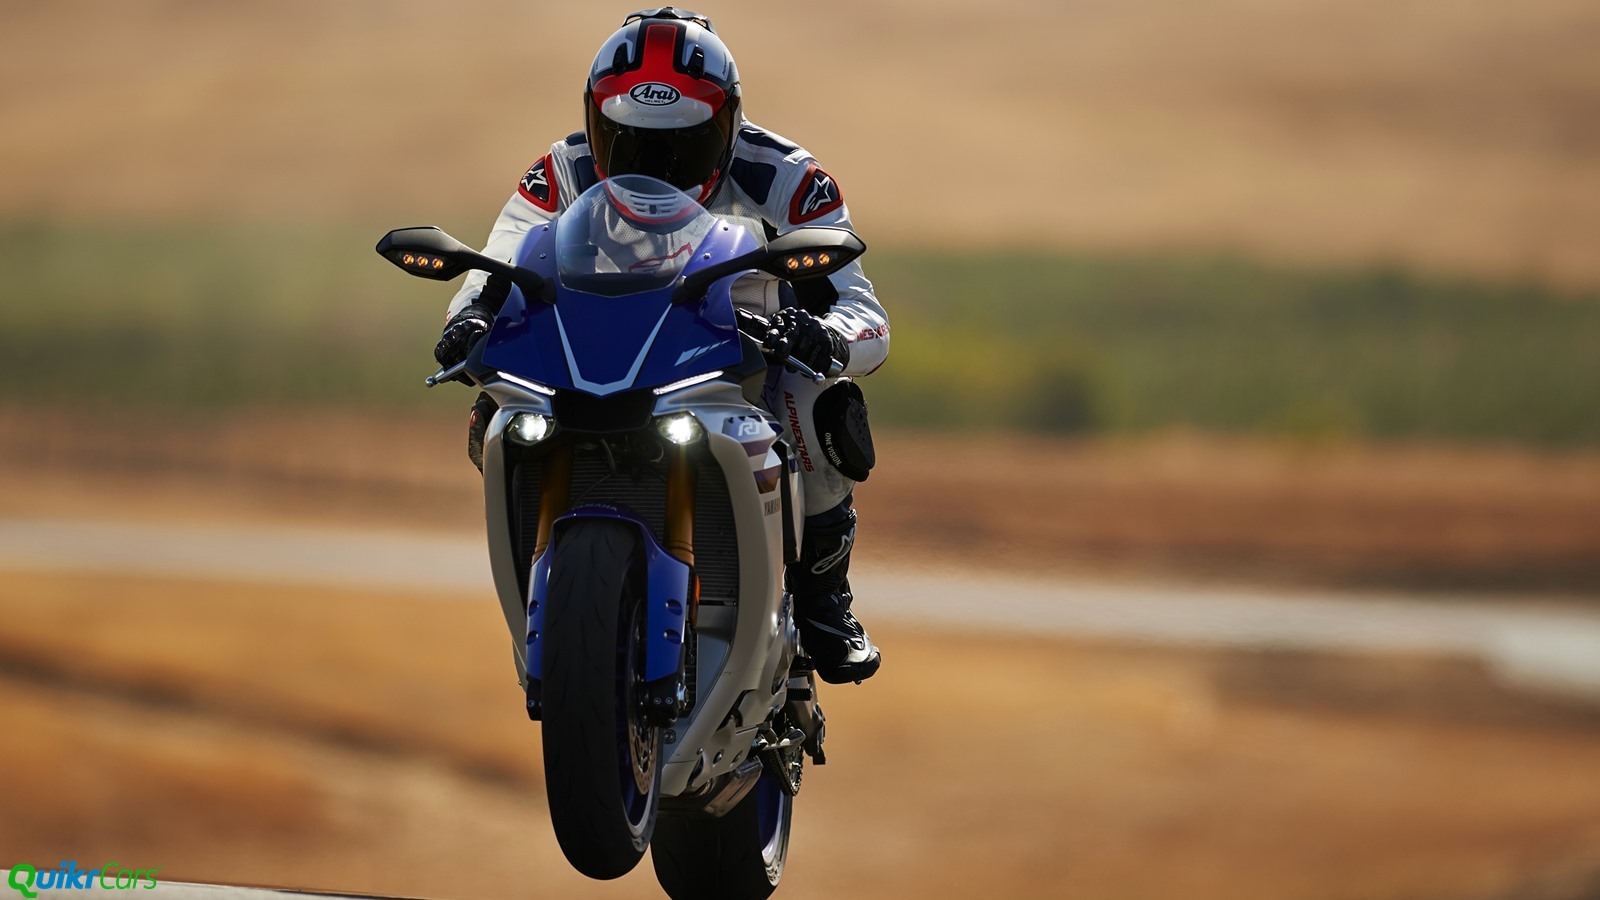 Upcoming recall for the 2015 Yamaha YZF-R1